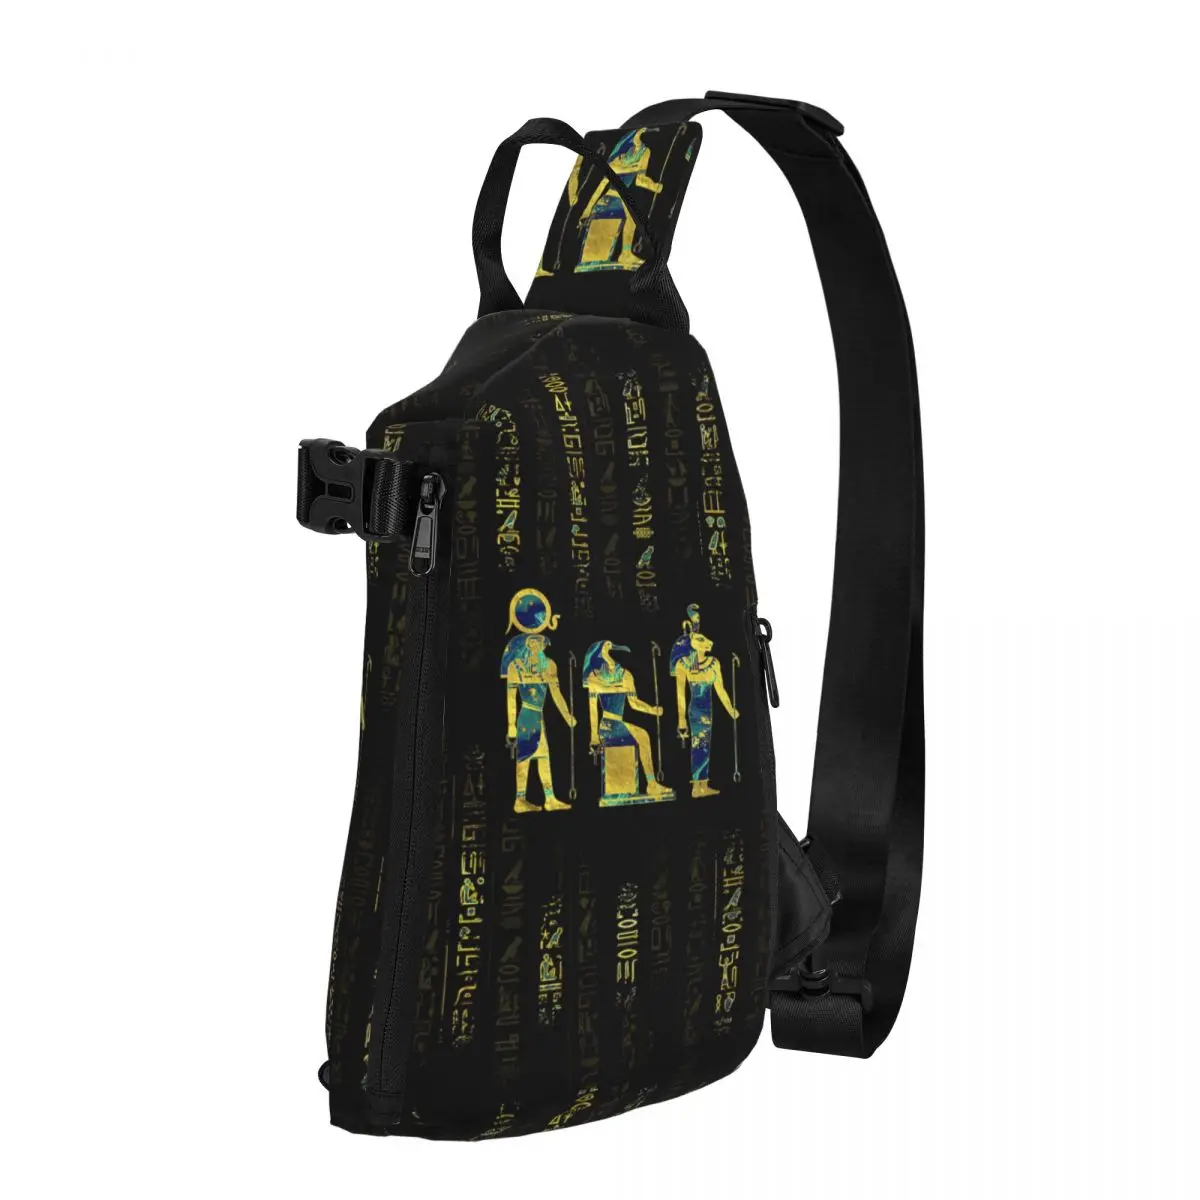 

Egyptian Deities On Hieroglyphics Gold And Marble Shoulder Bags Chest Cross Chest Bag Diagonally Casual Messenger Bag